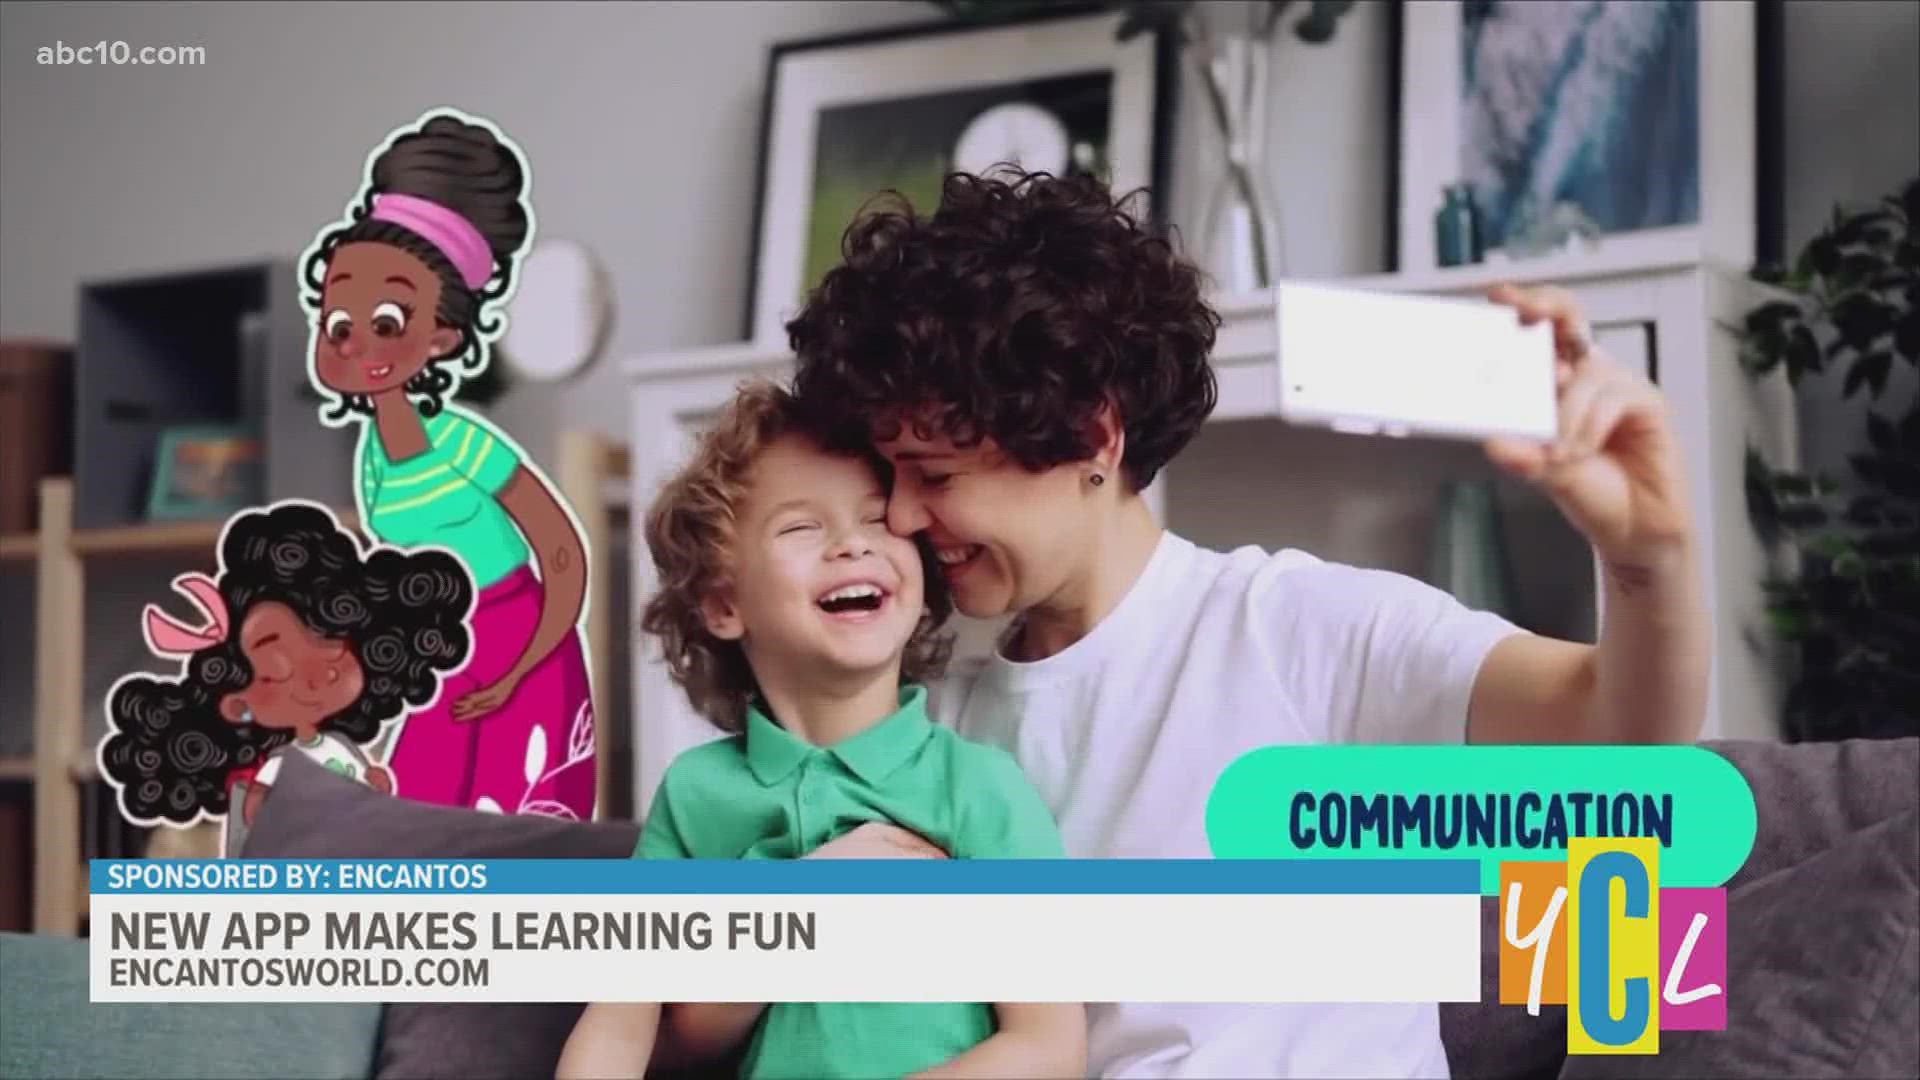 Learn about a new app based education platform that teaches both literacy and life skills while making learning fun. This segment paid for by Encantos.